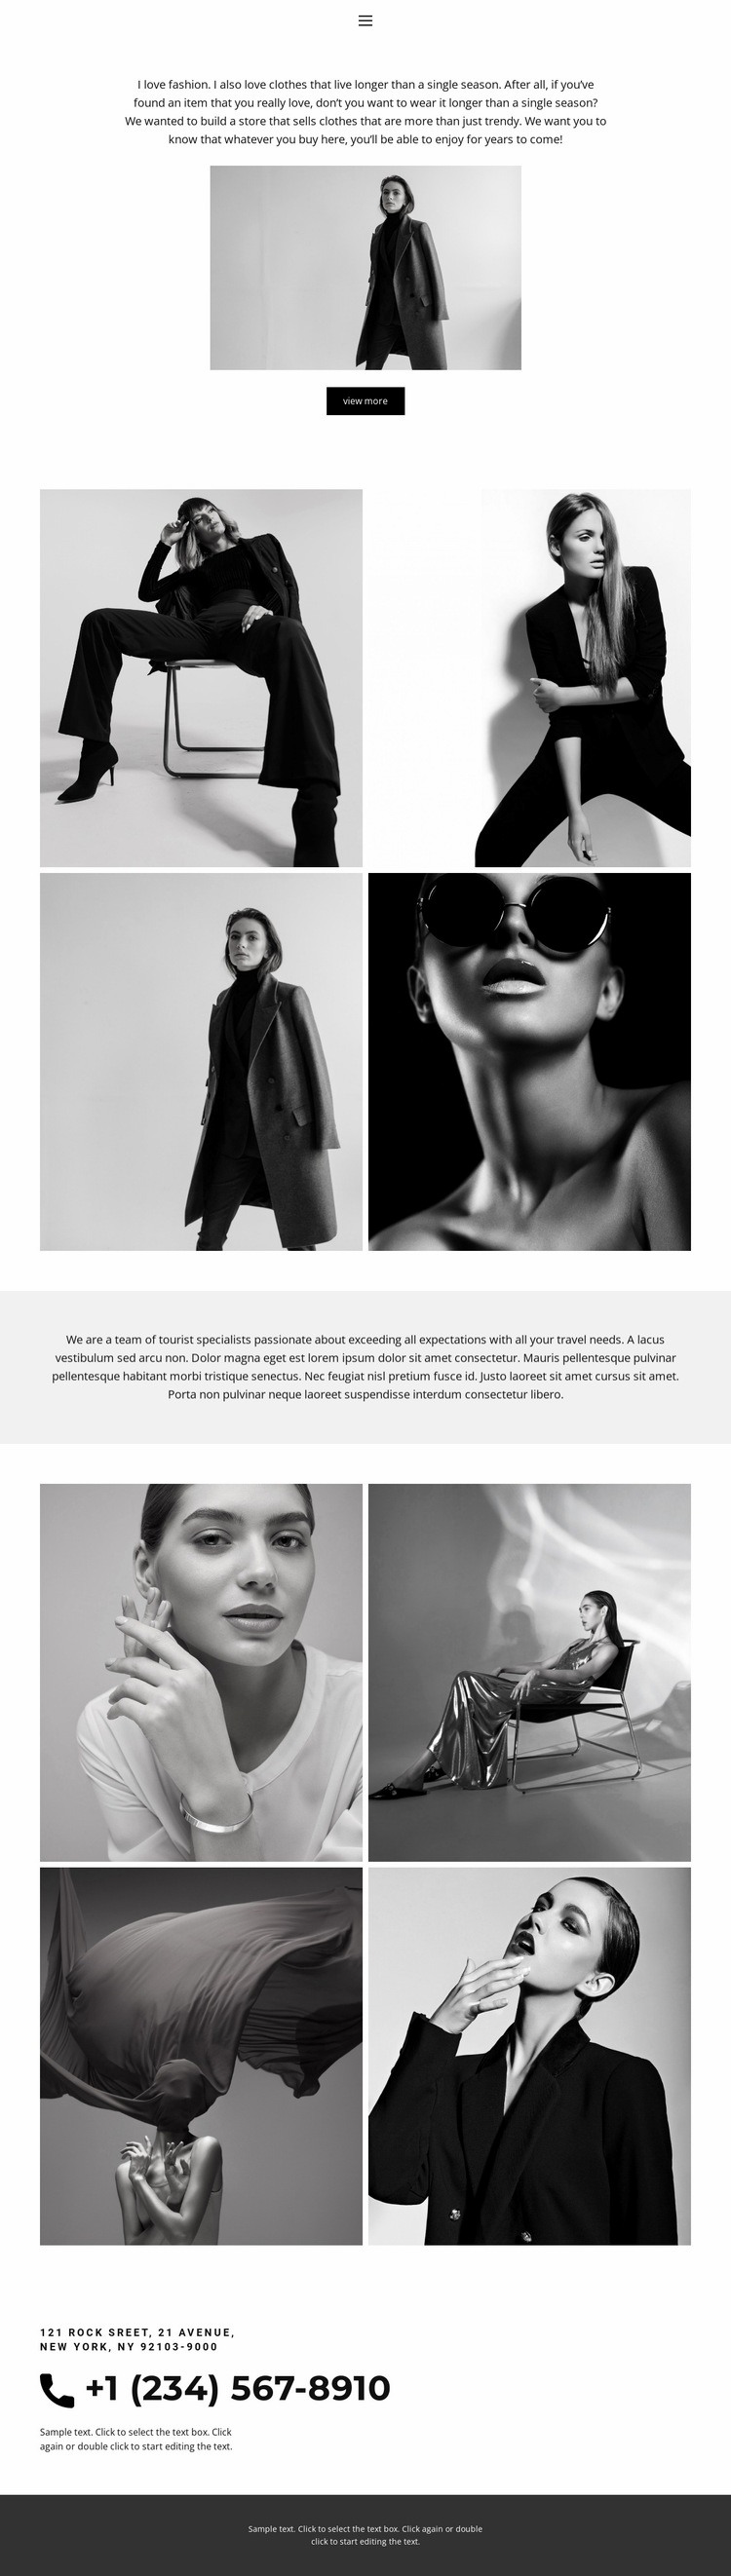 Our lookbook Web Page Design